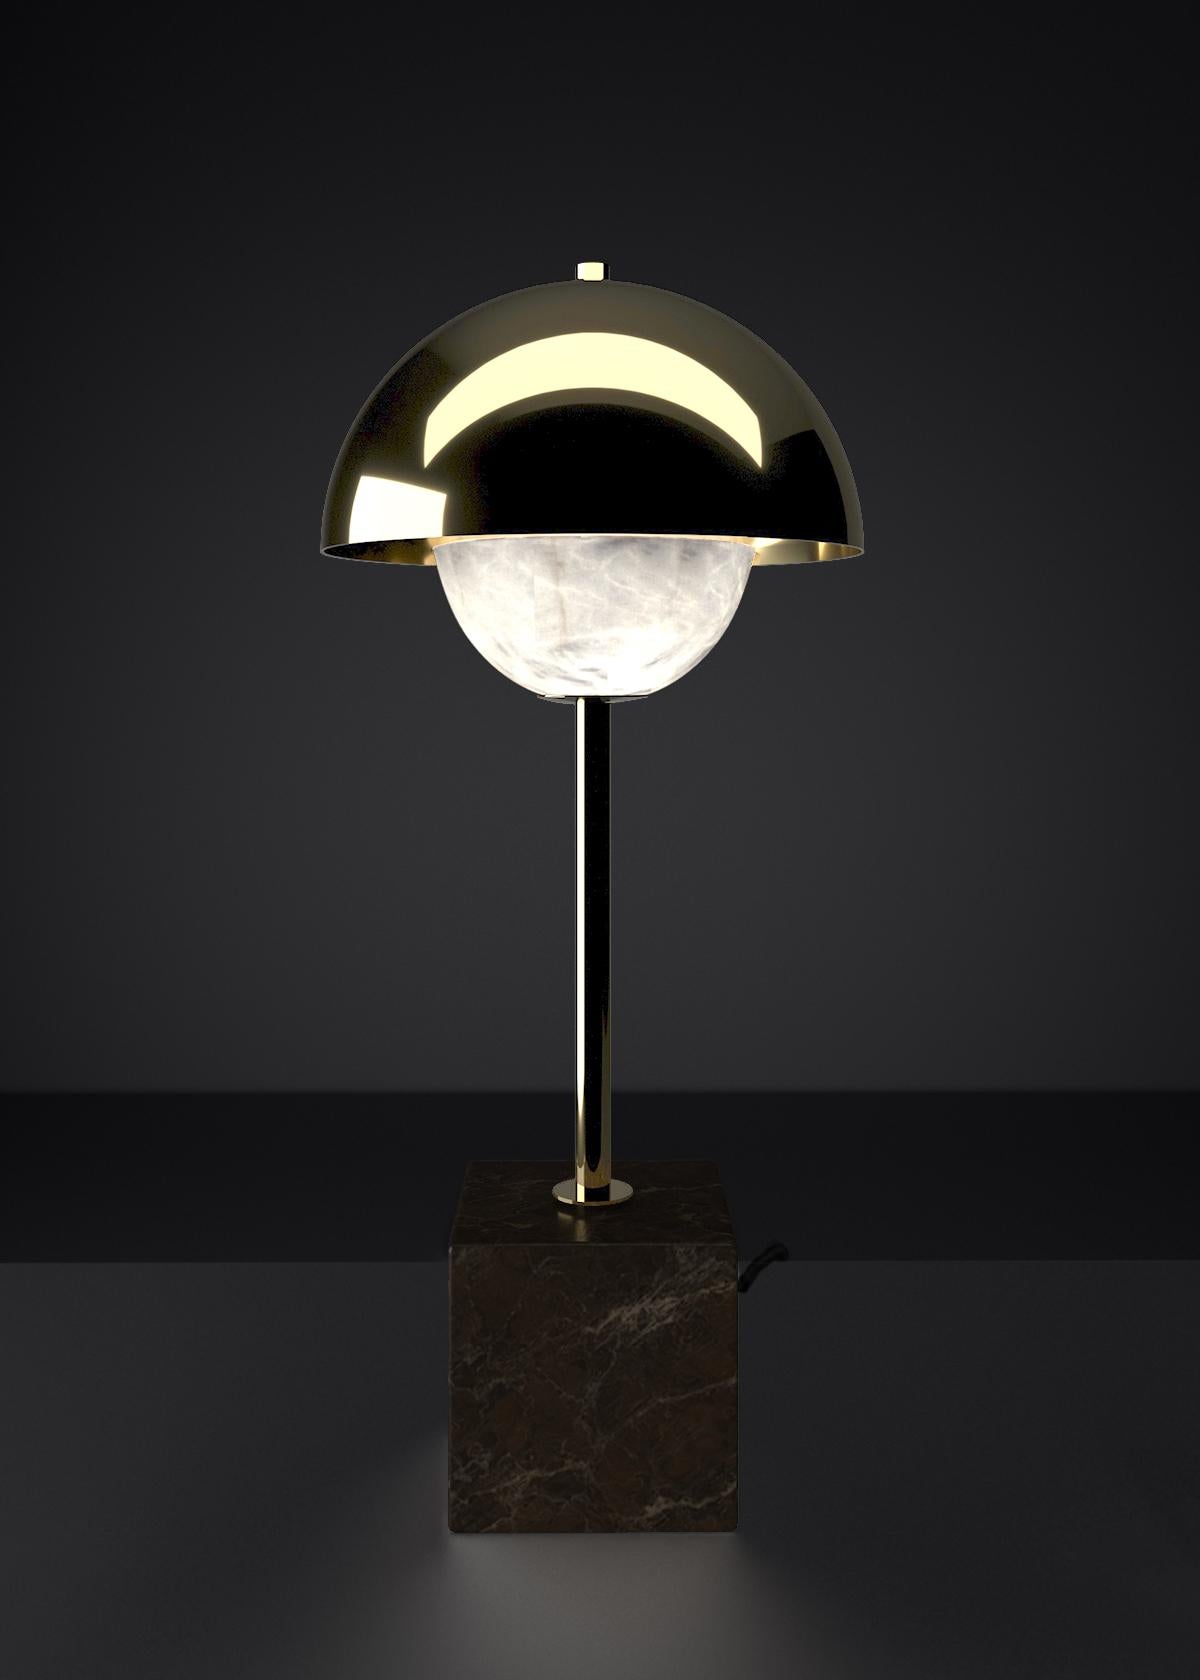 Apollo Shiny Gold Metal Table Lamp by Alabastro Italiano
Dimensions: D 30 x W 30 x H 74 cm.
Materials: White alabaster, Nero Marquinia marble, black silk cables and metal.

Available in different finishes: Shiny Silver, Bronze, Brushed Brass,